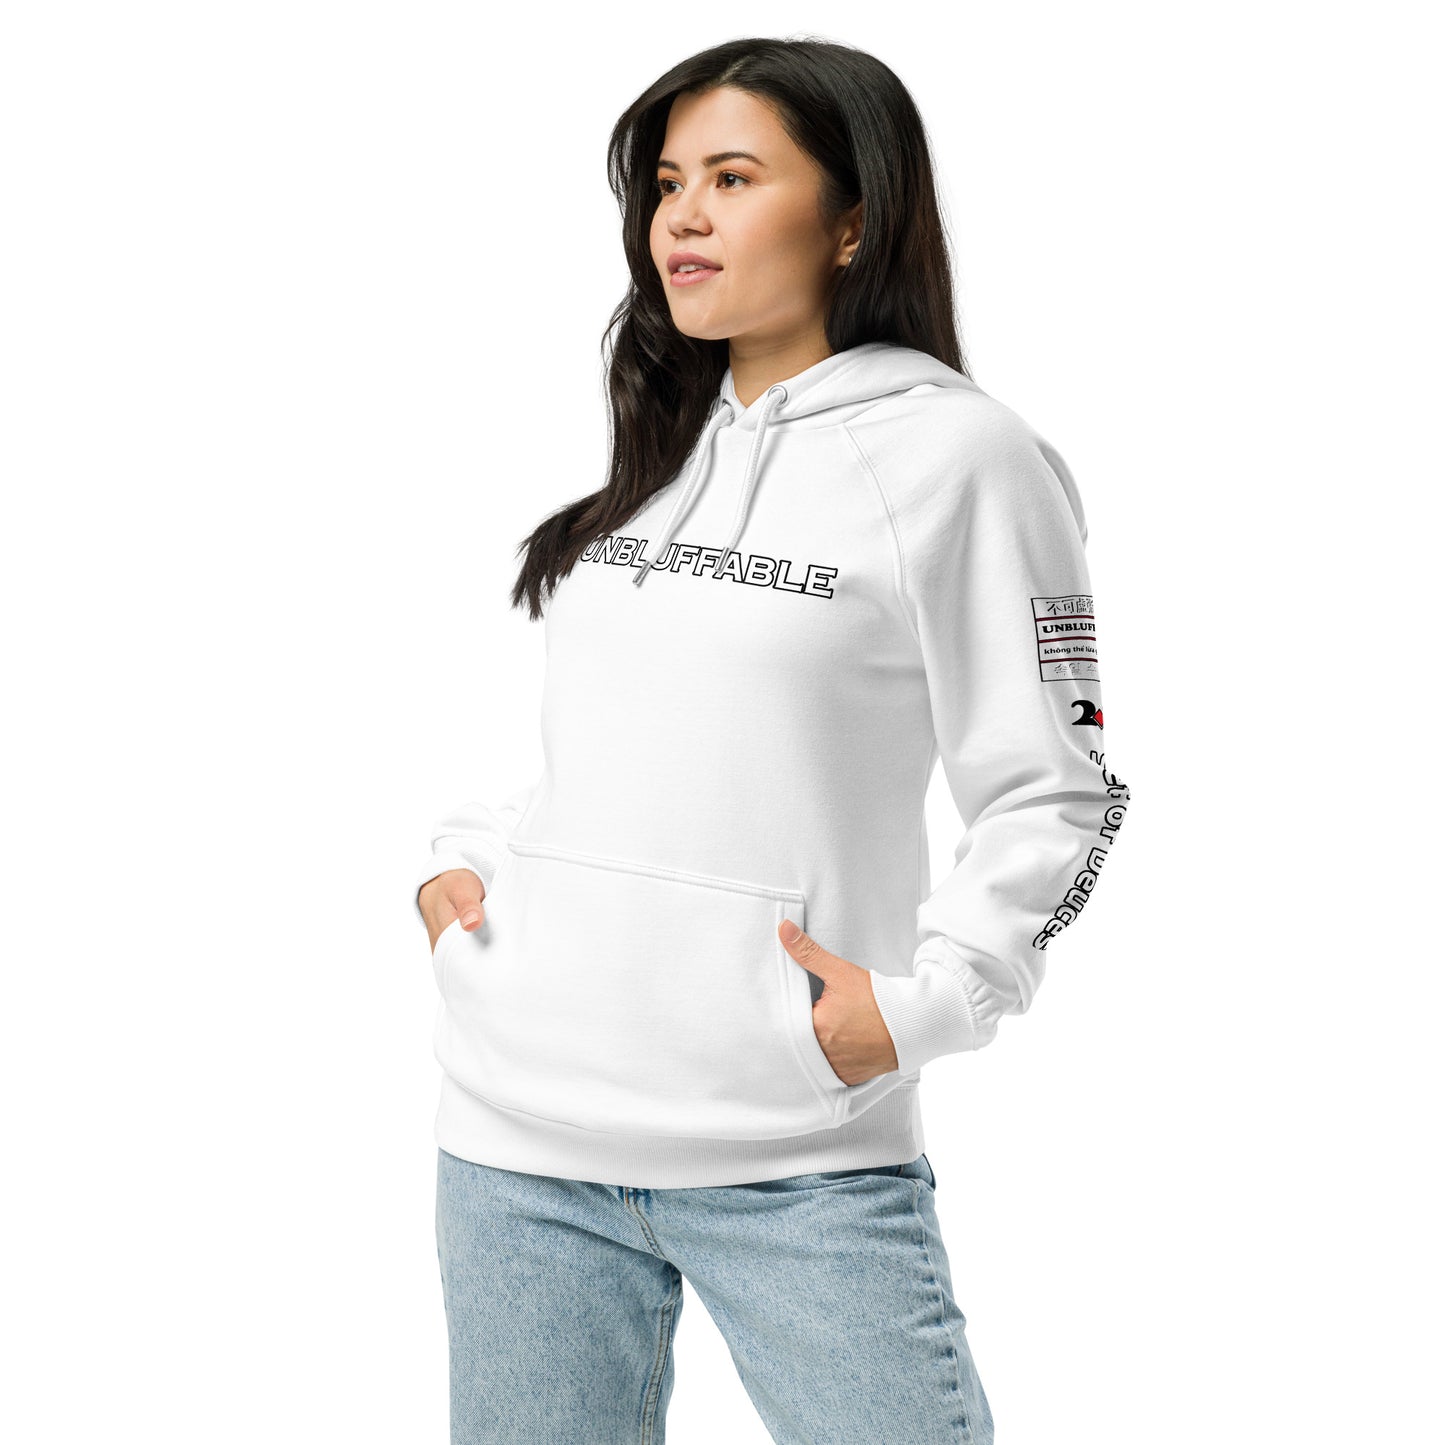 Club promo UNBLUFFABLE Set of Deuces Hoodie